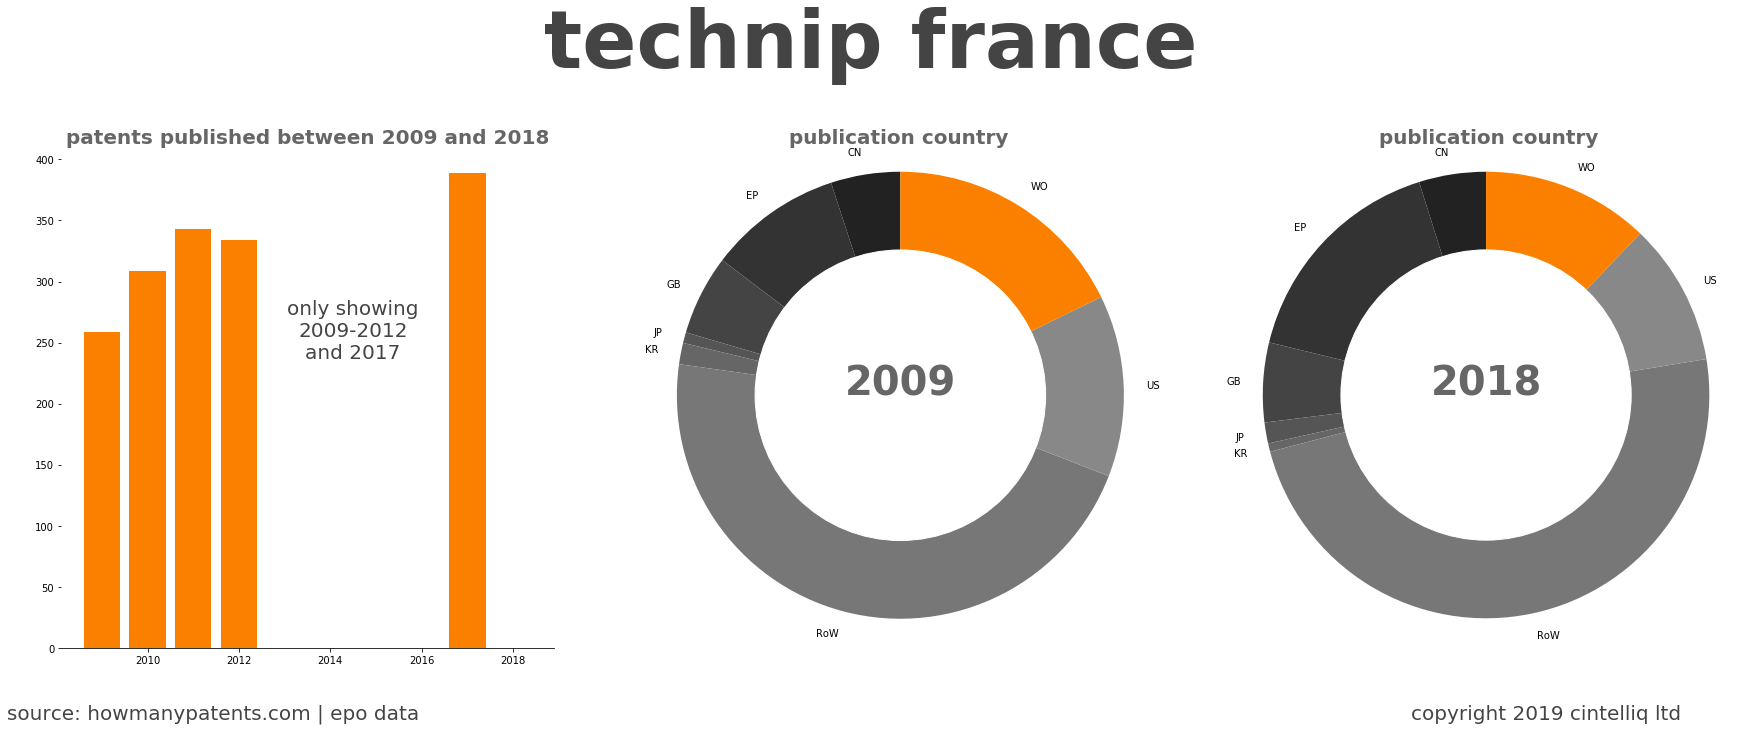 summary of patents for Technip France